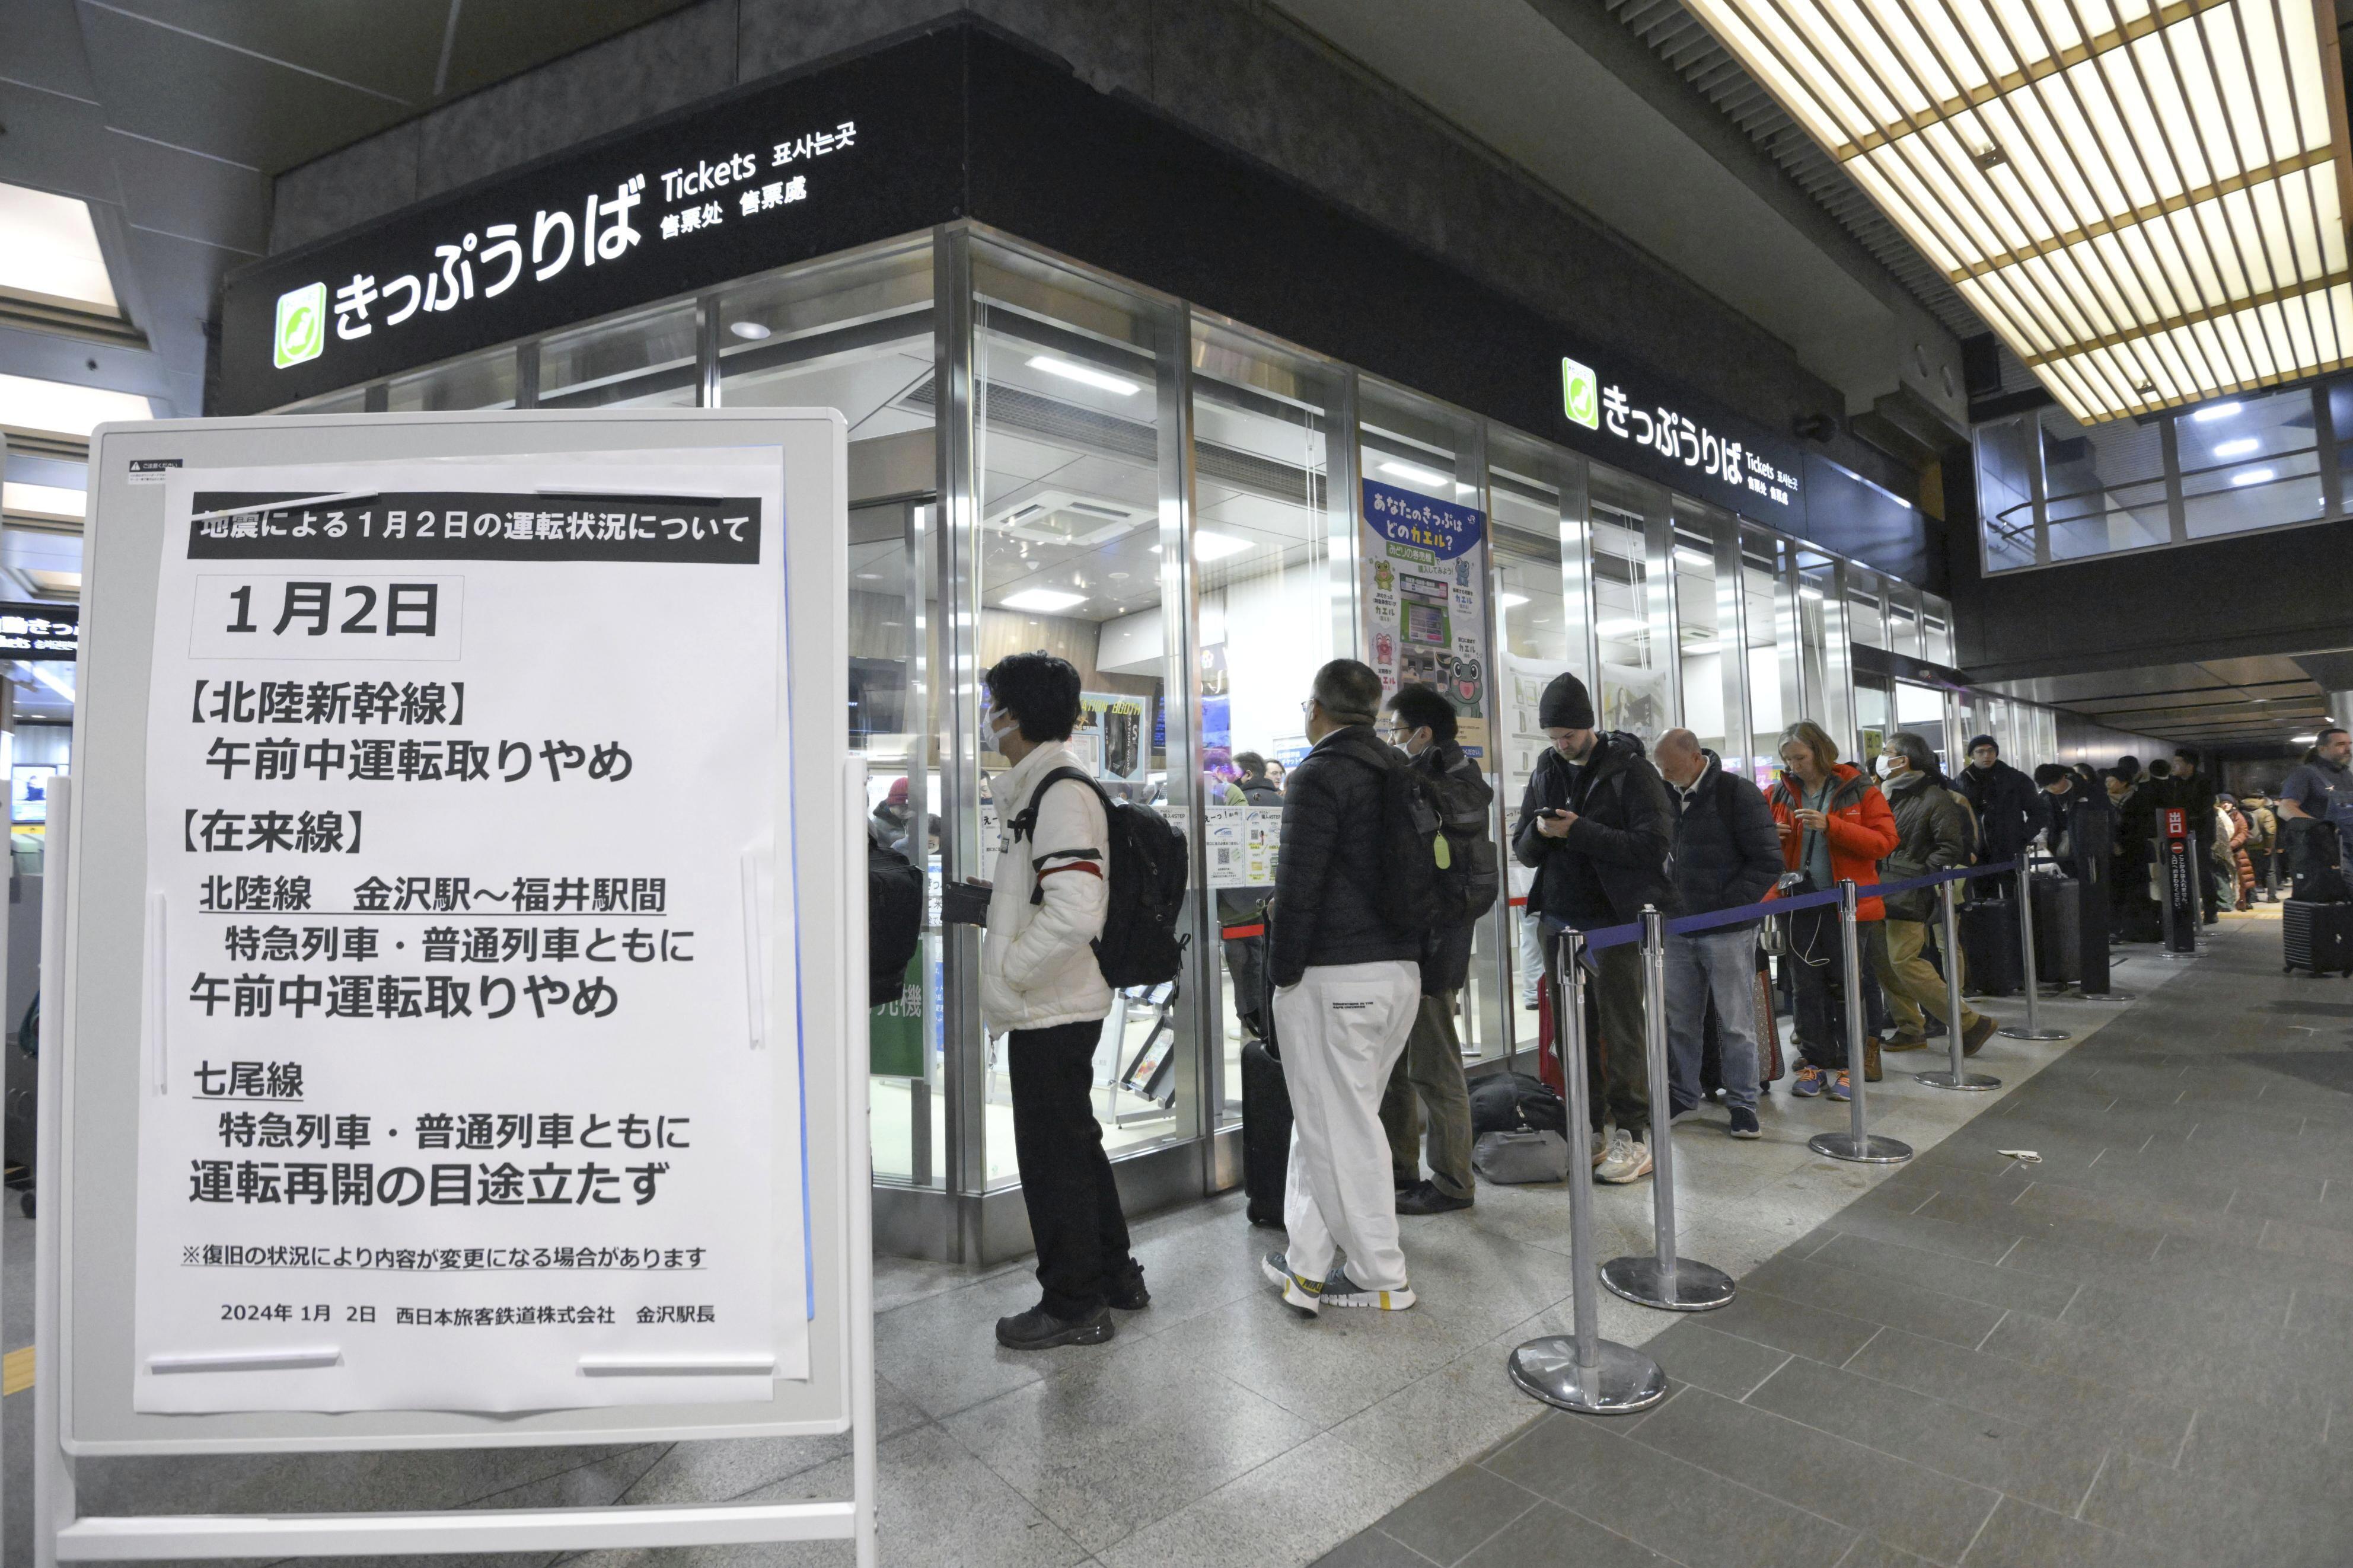 Passengers make a line in front of a ticket counter at JR Kanazawa station in Kanazawa, Ishikawa prefecture, Japan, on January 2, as some train services were cancelled following the earthquake.